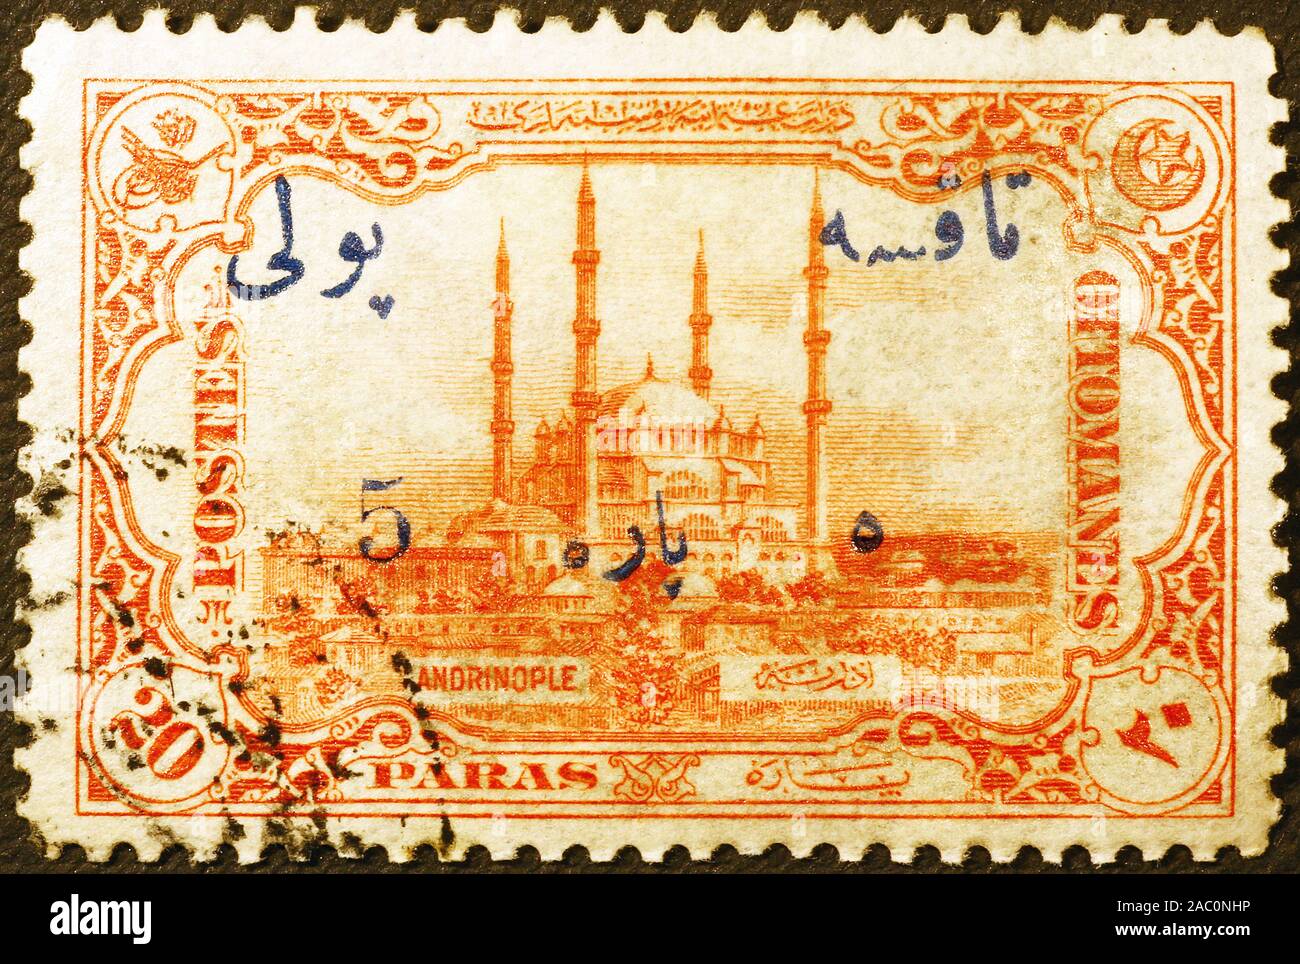 Mosque on old turkish postage stamp Stock Photo